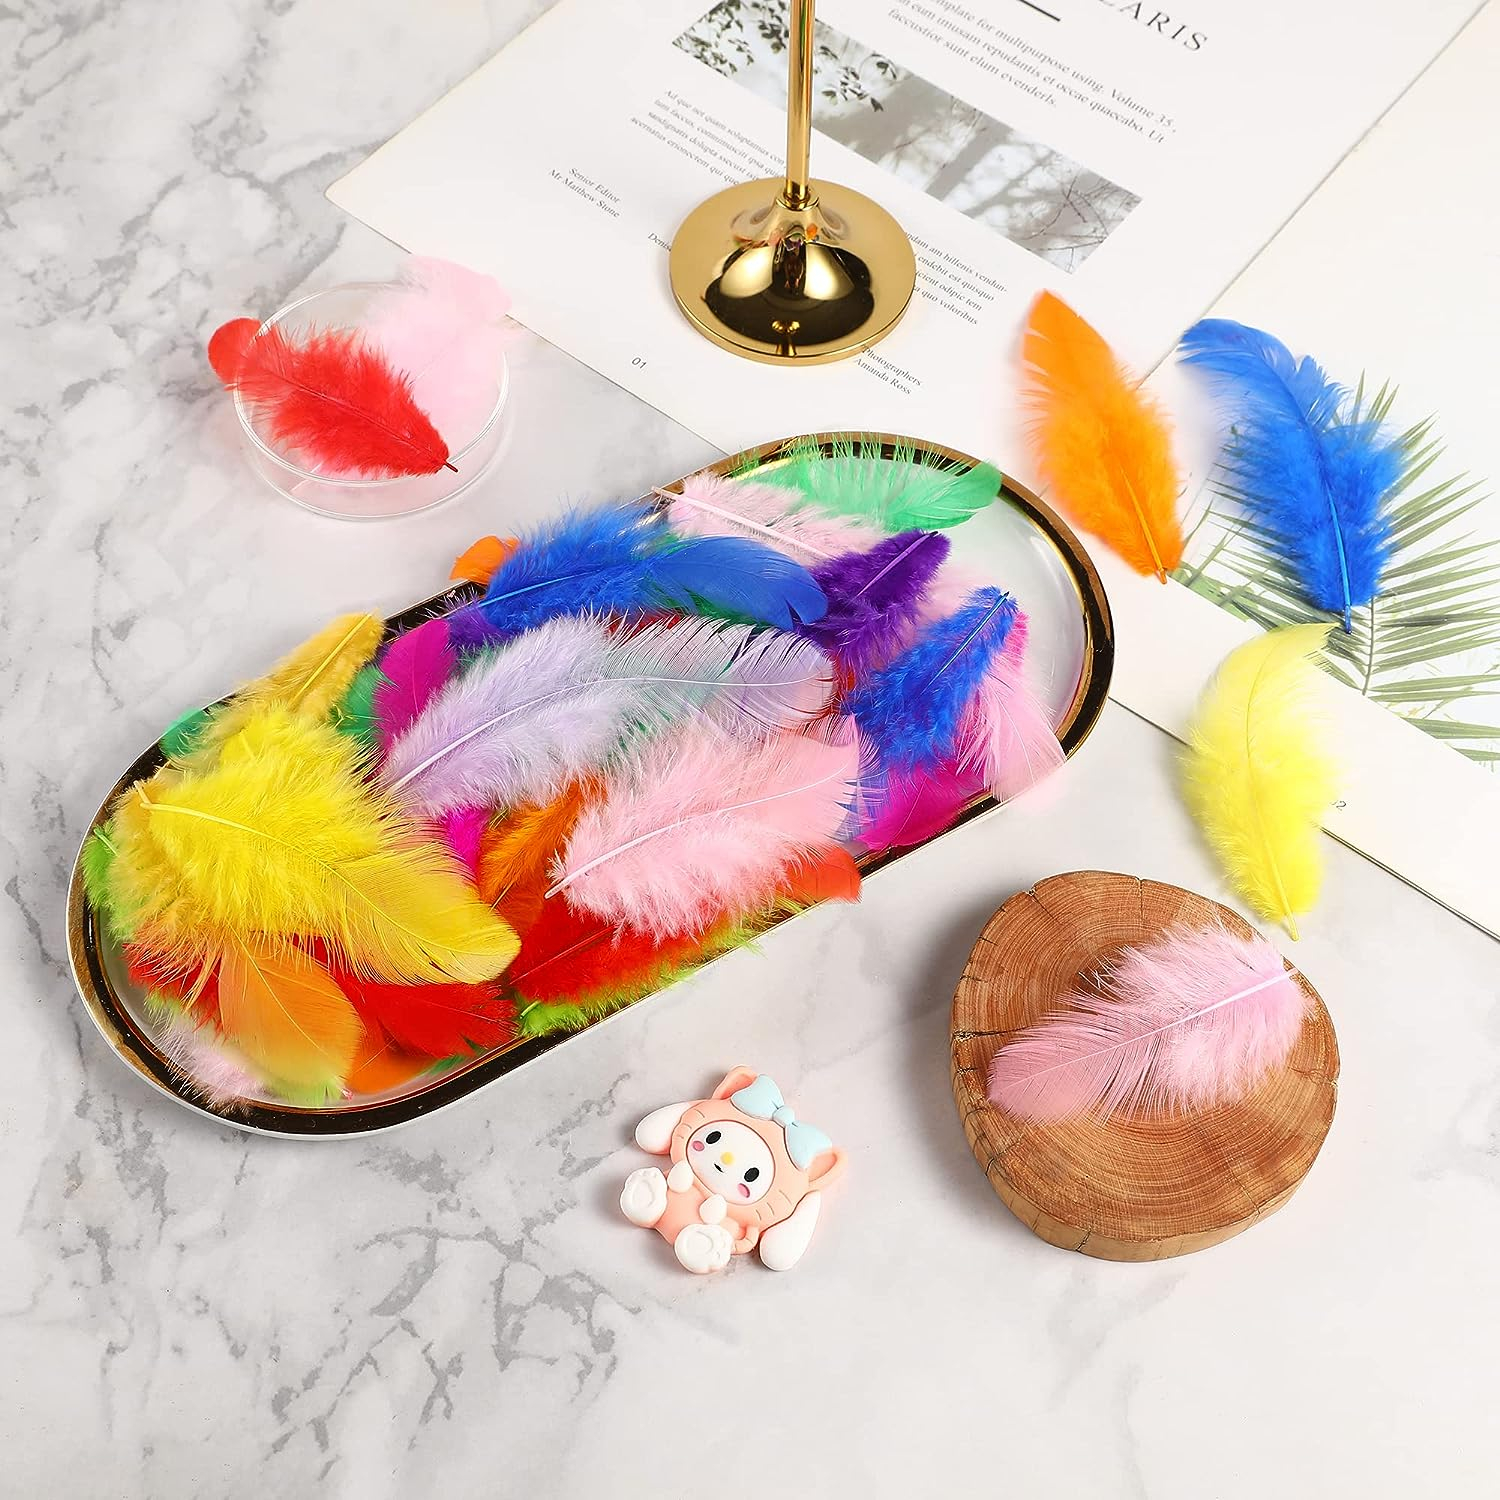 Rooster Saddle Hackle Feathers Bulk 300pcs Colorful Craft Feathers 4-6inch Pheasant Neck Feather for Pendant Earrings Dream Catchers DIY Wedding